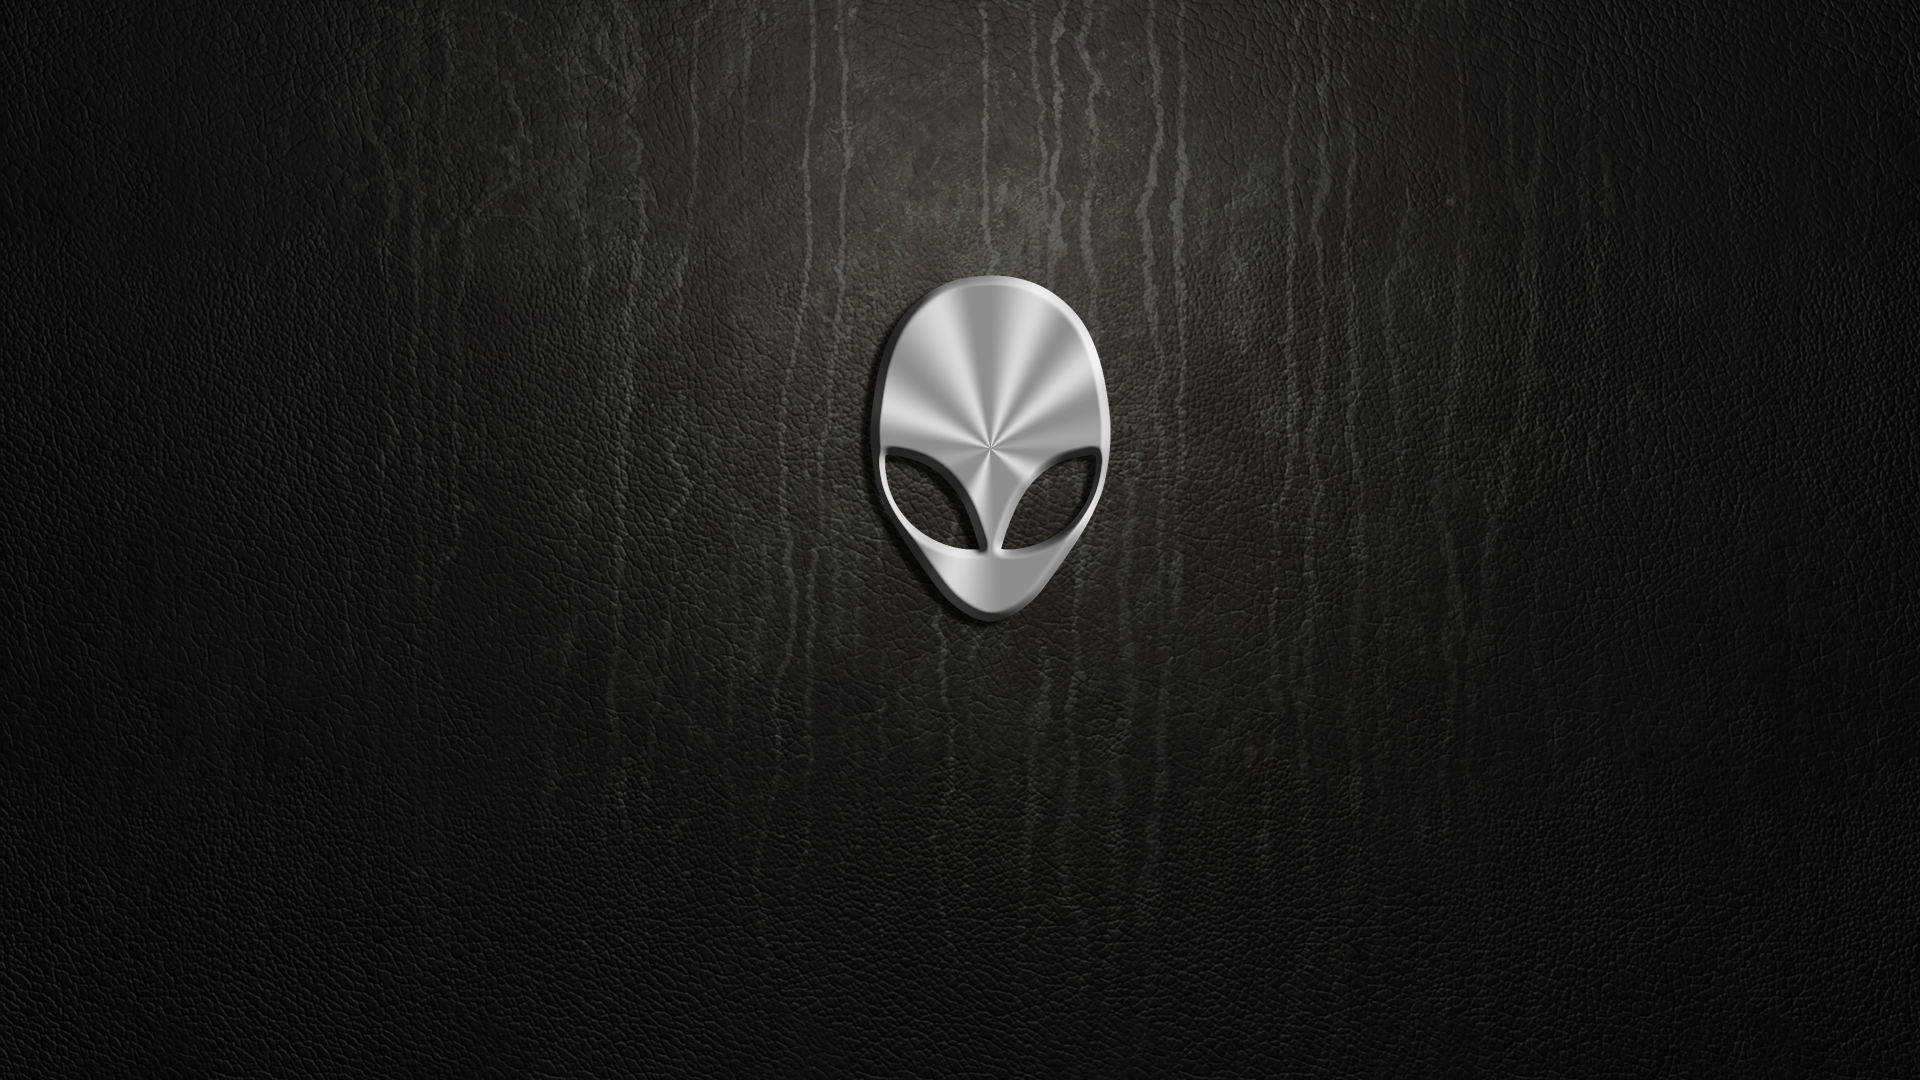 Computer Computers Alienware Logo Leather Texture Wallpapers Hd Desktop And Mobile Backgrounds